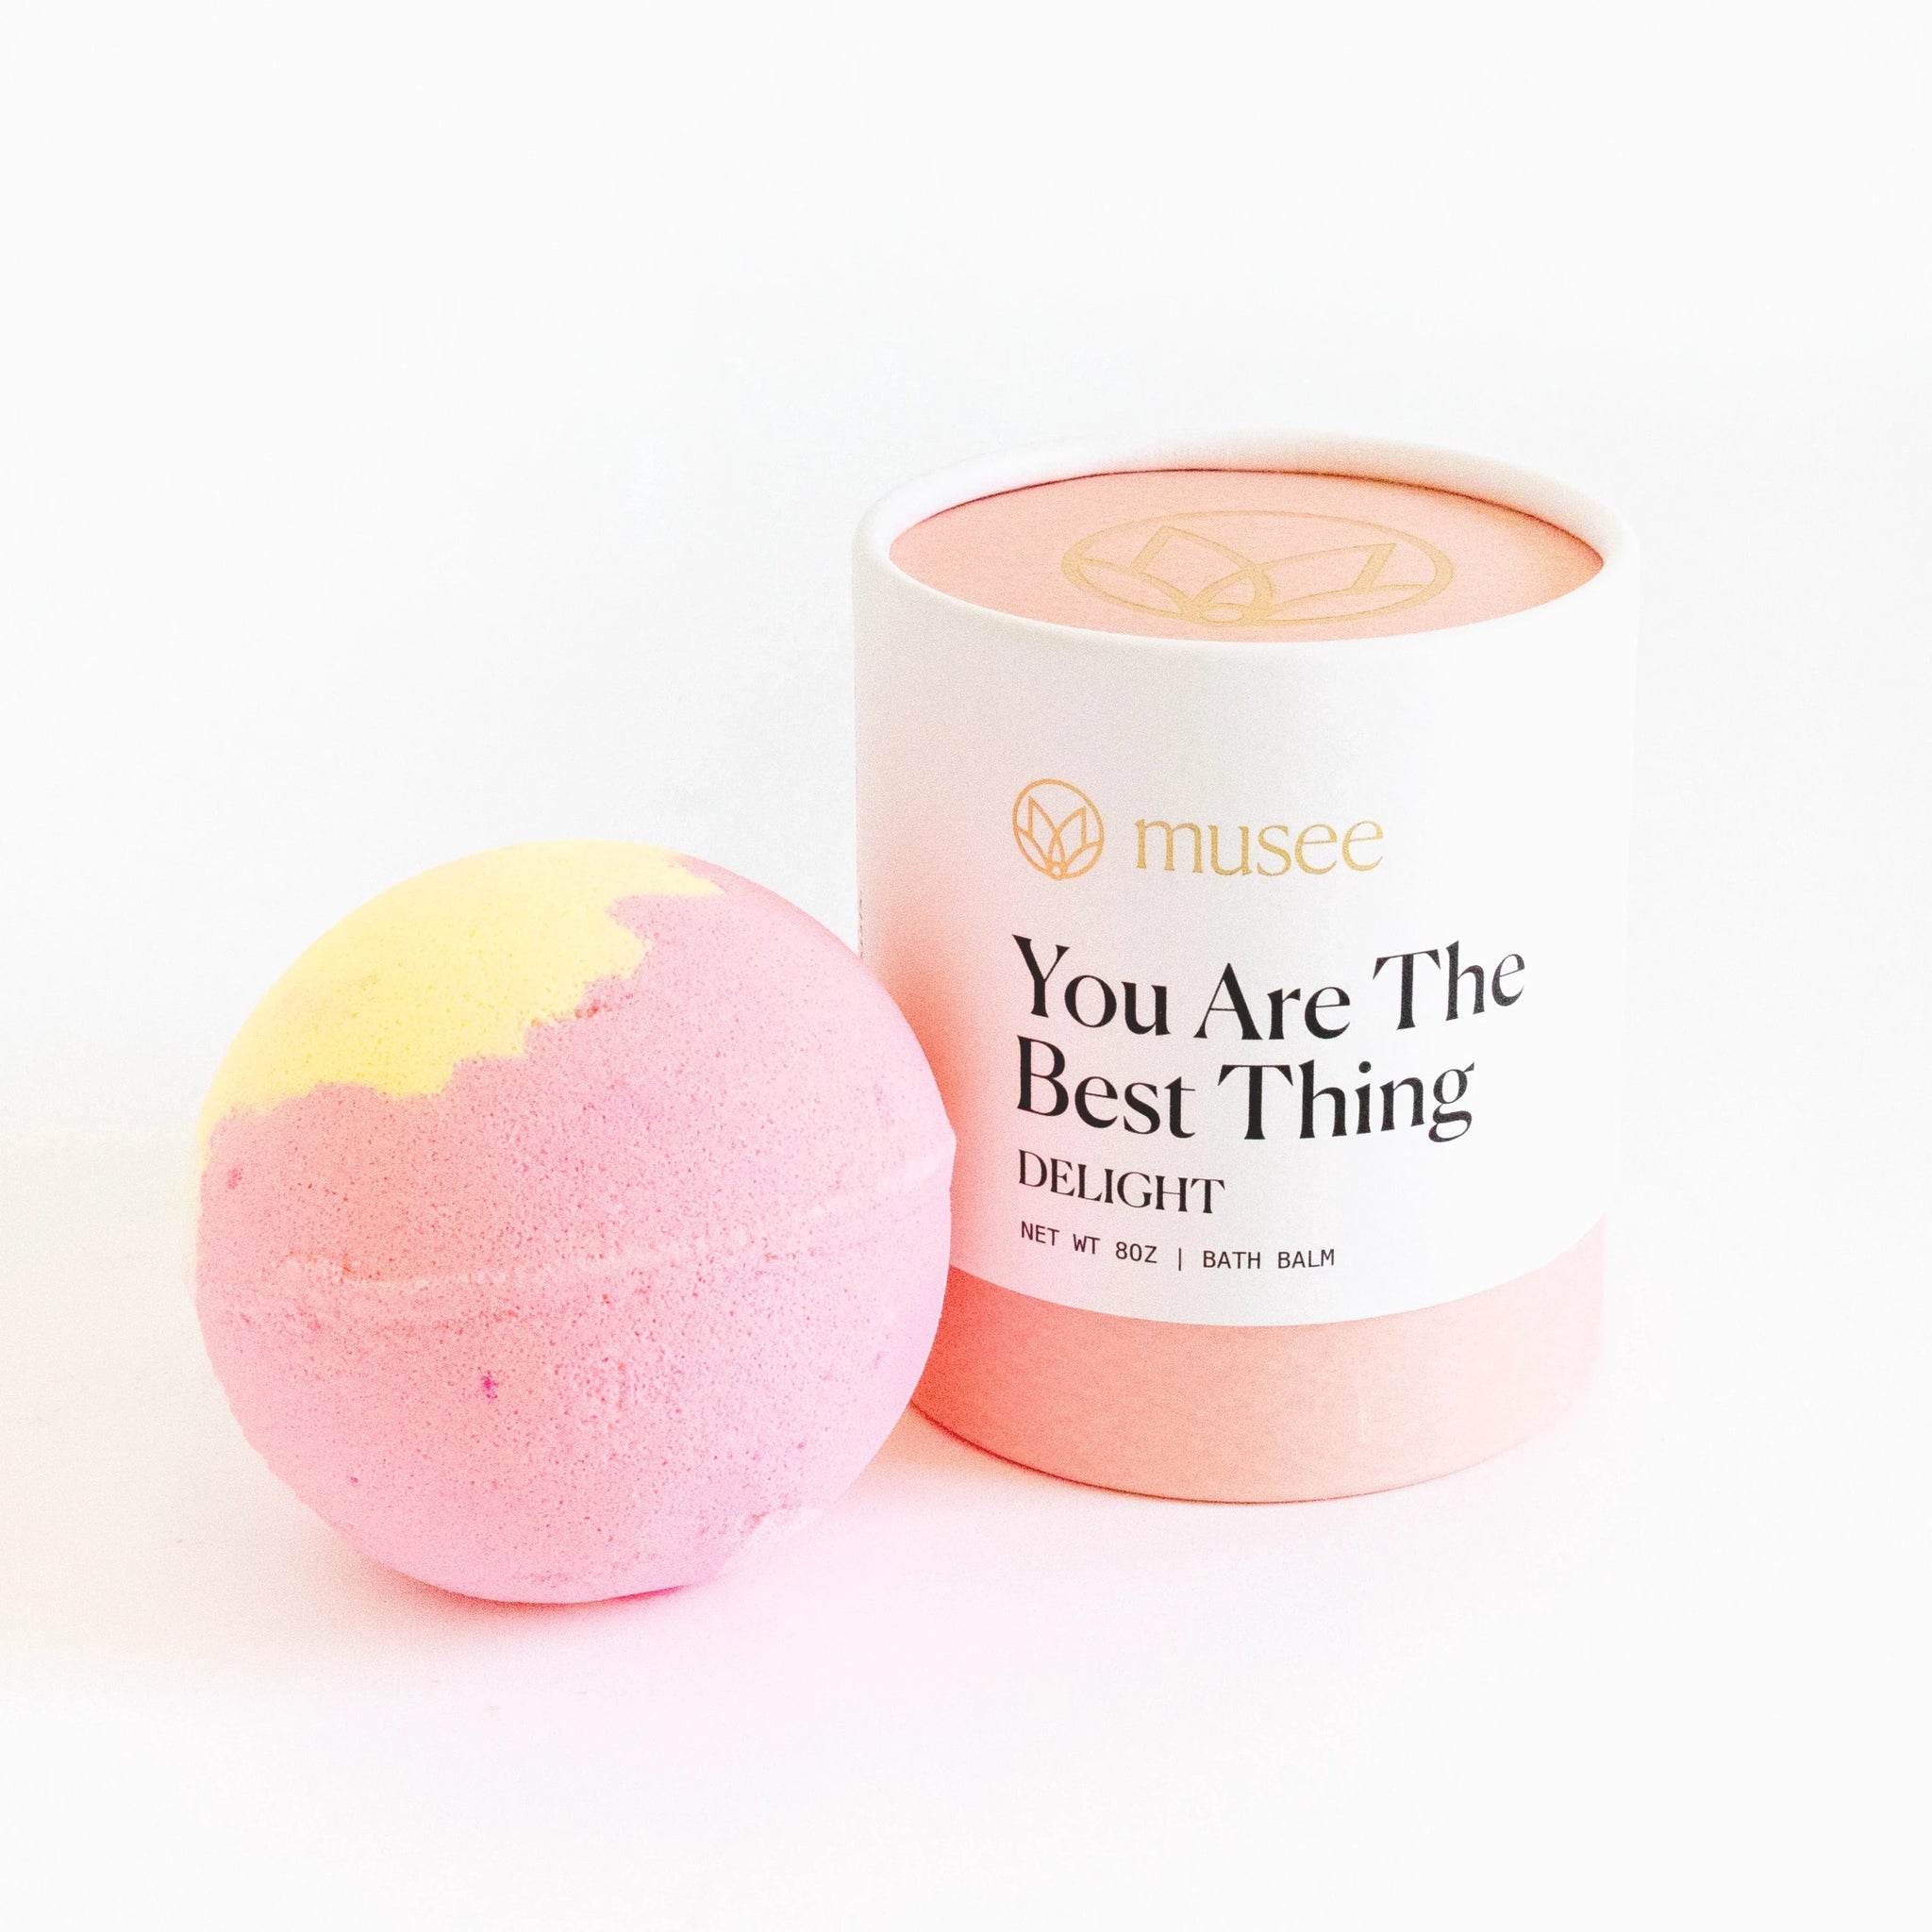 You Are The Best Thing Bath Balm